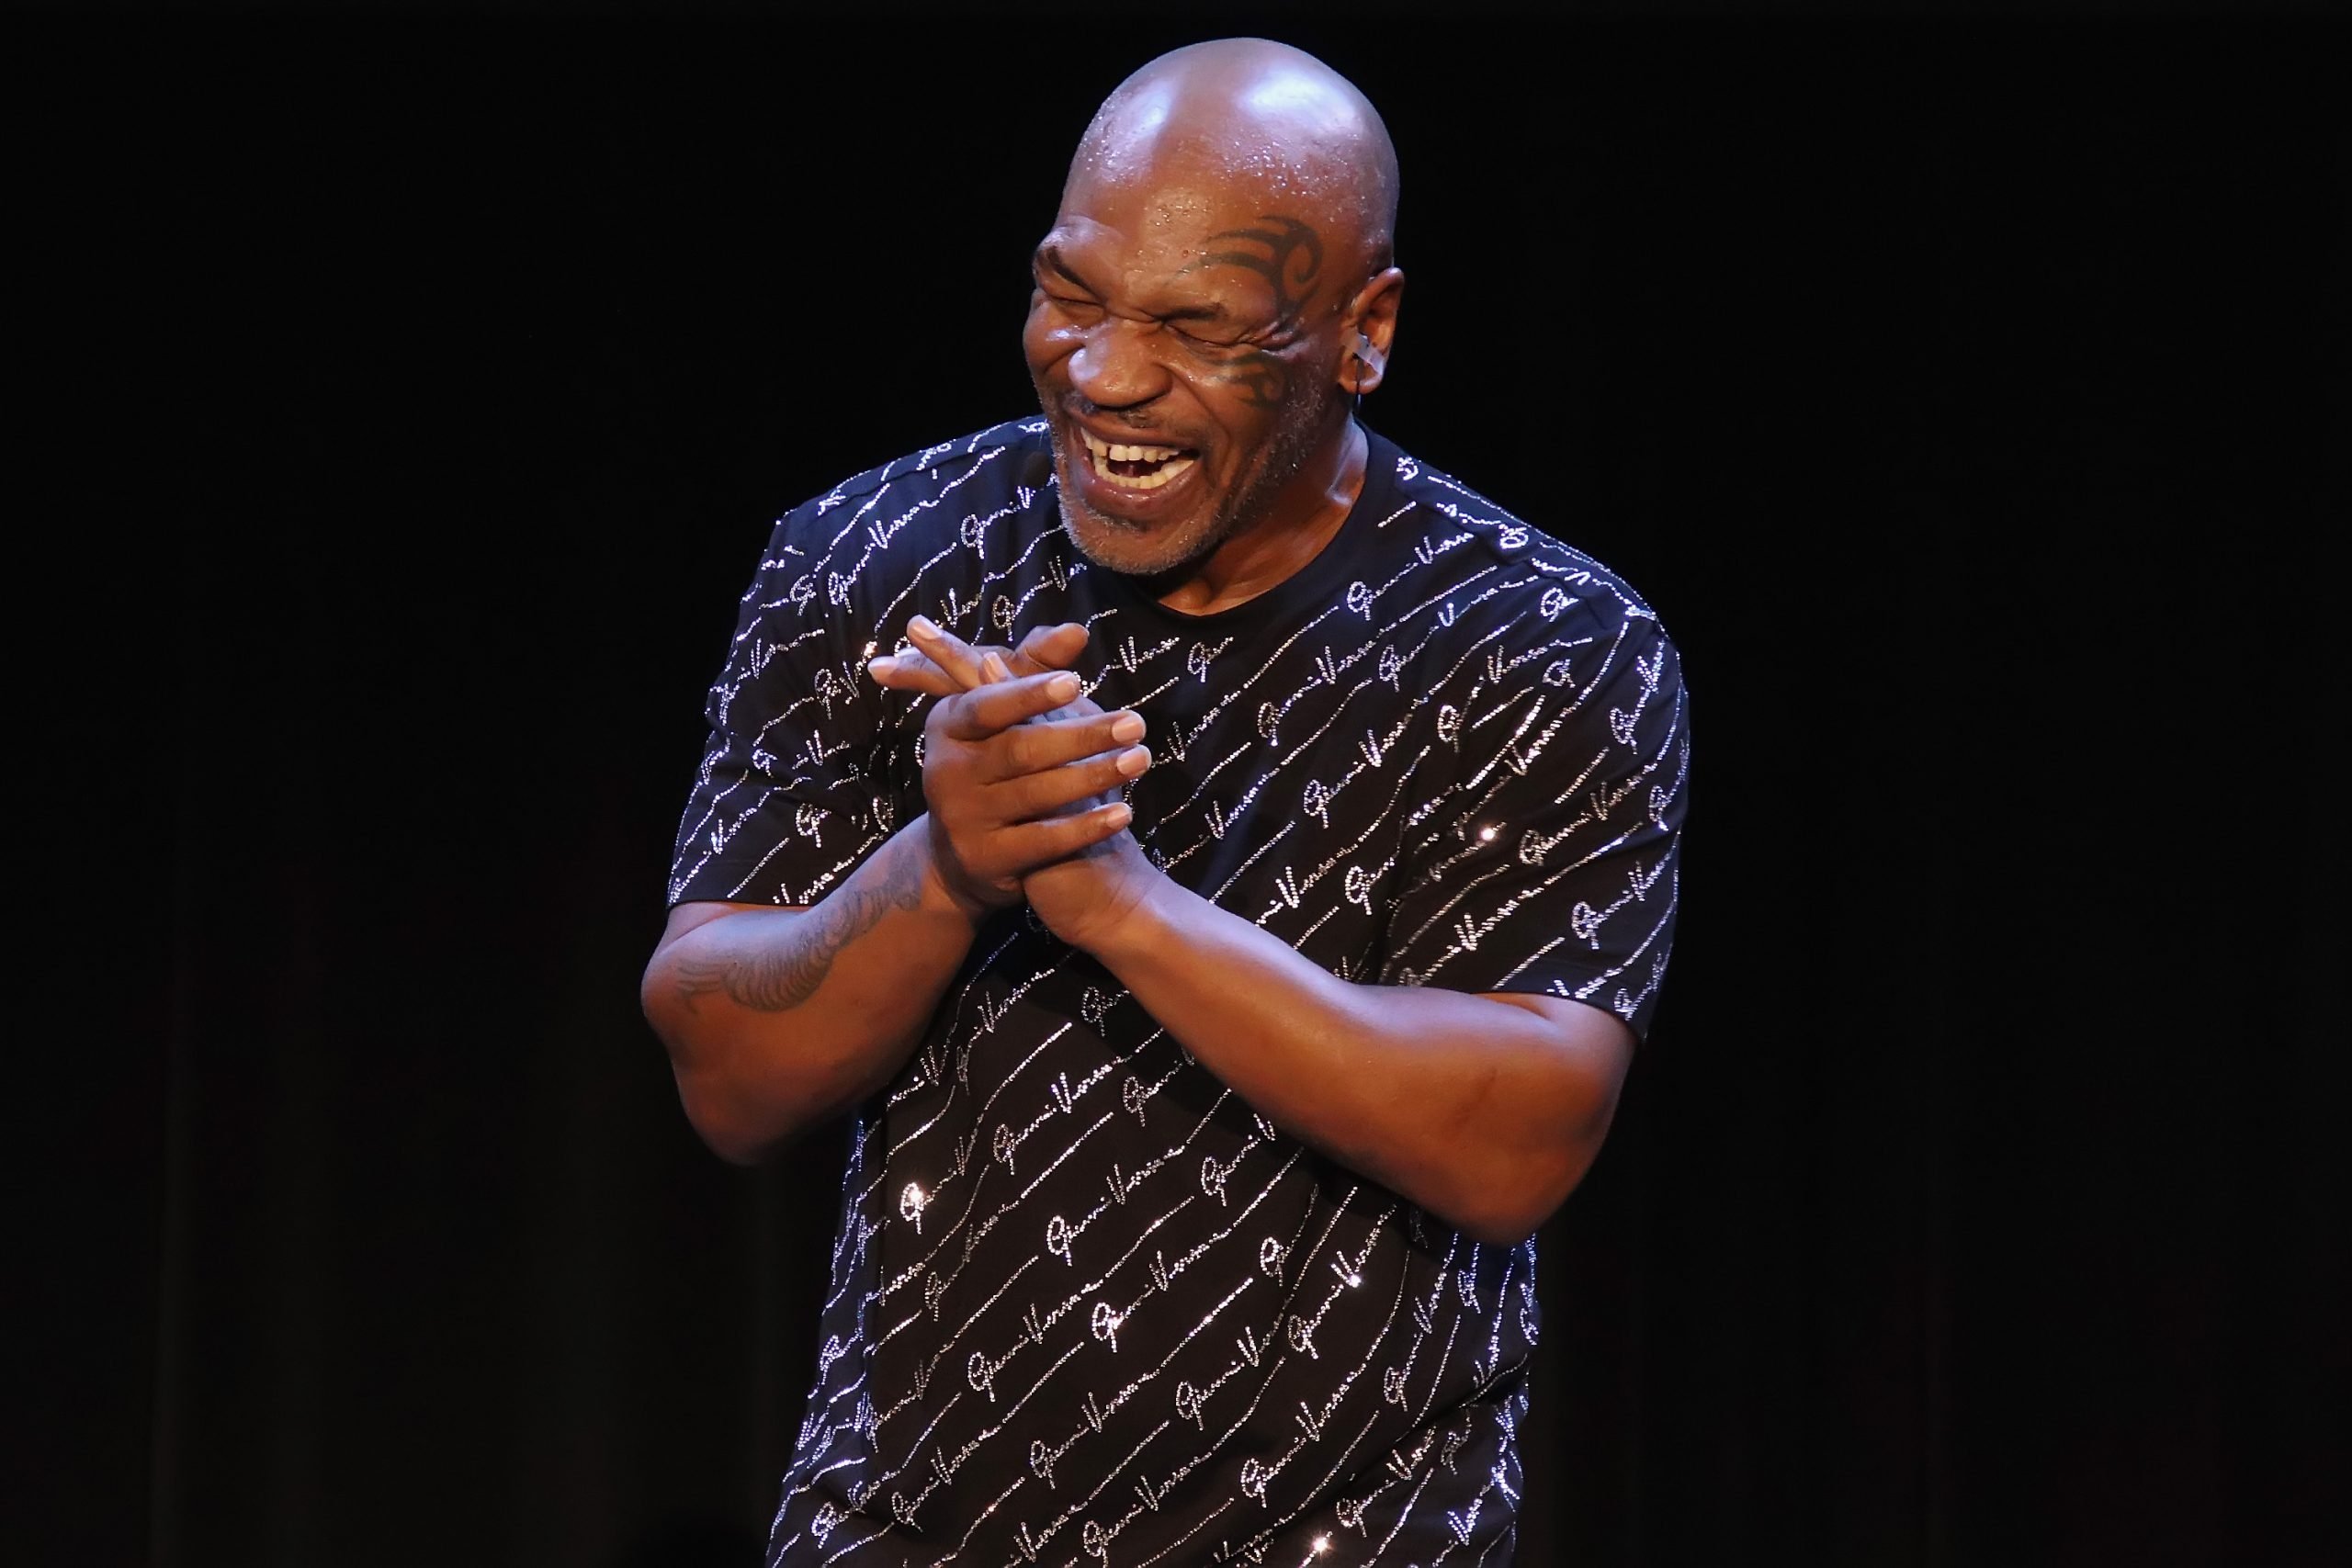 Mike Tyson at his one man show